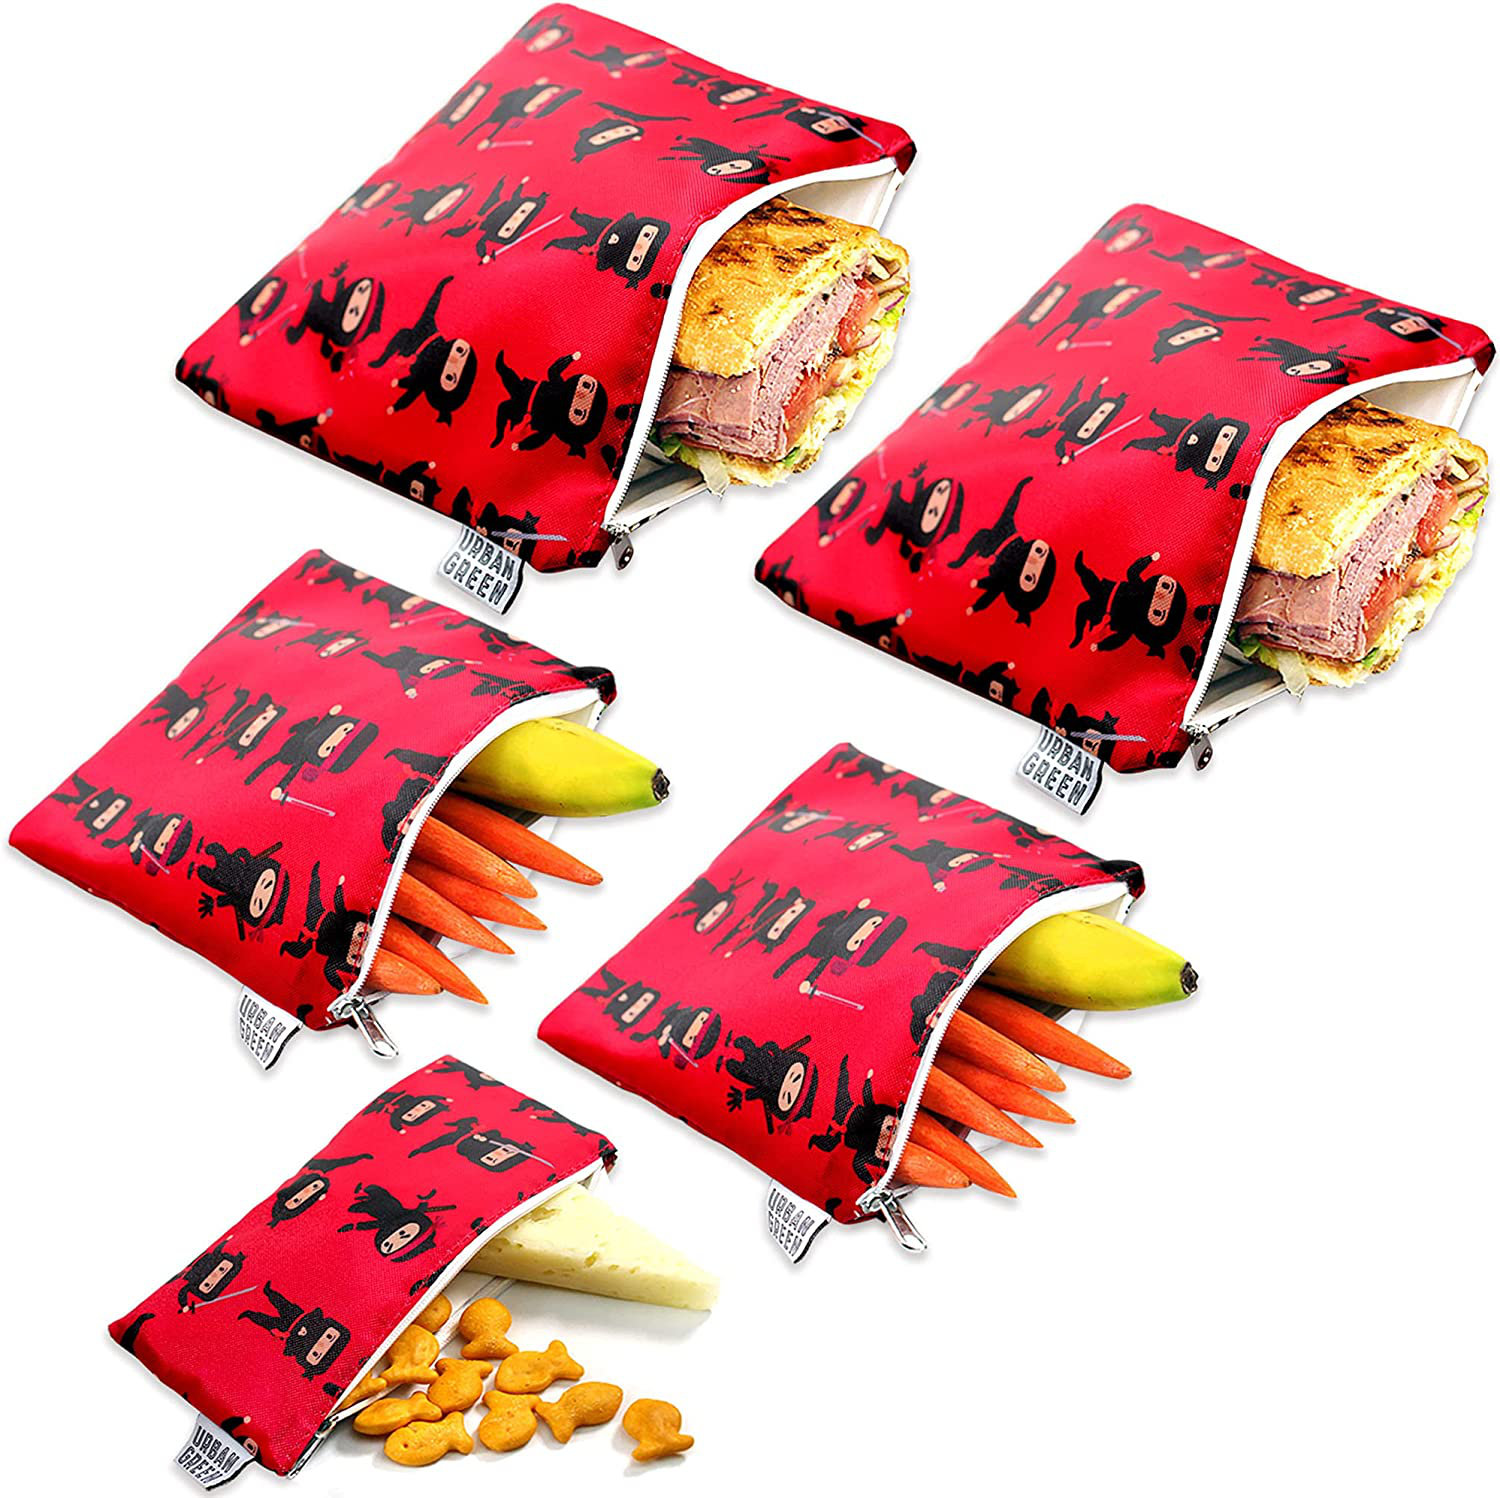 Reusable Snack Bags for Kids Urban Green, Kids Snack Containers, Reusable Sandwich Bag Kids, Dishwasher Safe, BPA Free, 5 Pack, Sandwich Reusable Bag